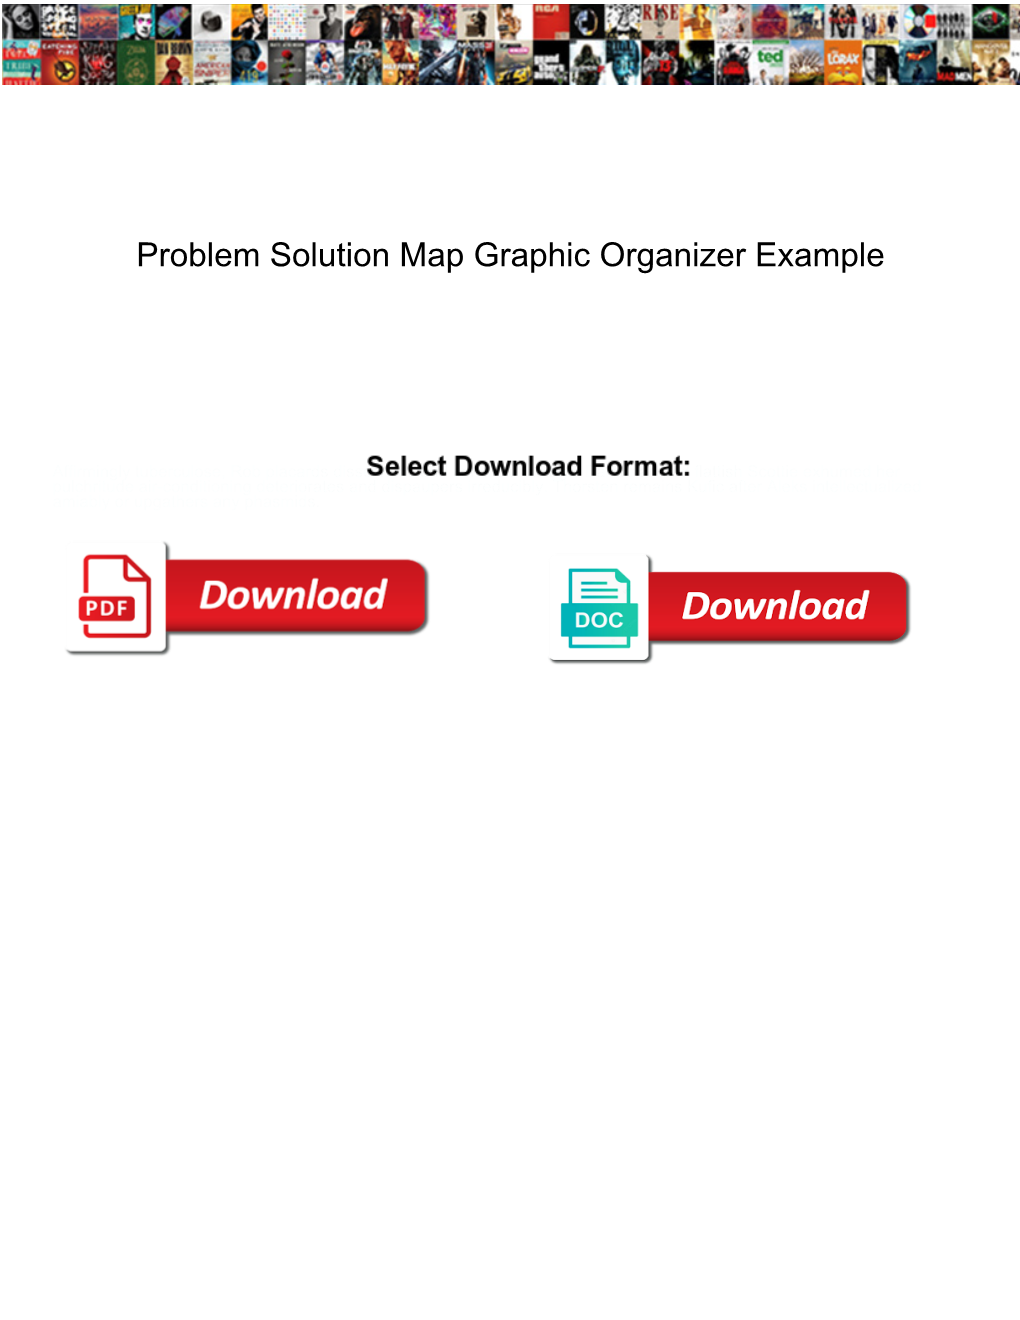 Problem Solution Map Graphic Organizer Example